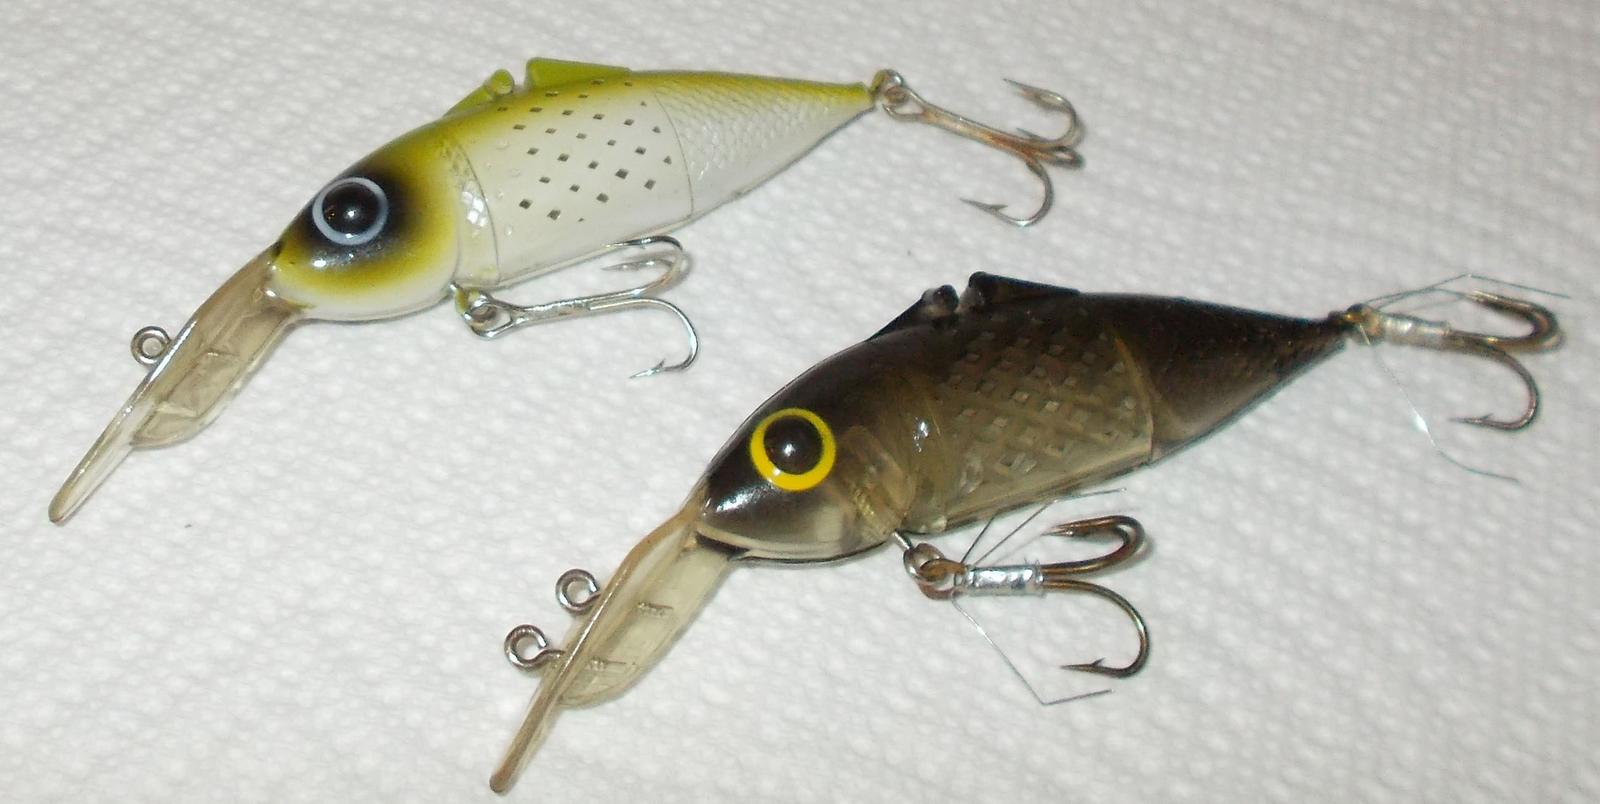 LOT OF 2 MIKE THE FISHERMAN SCENT BLEEDING LURES